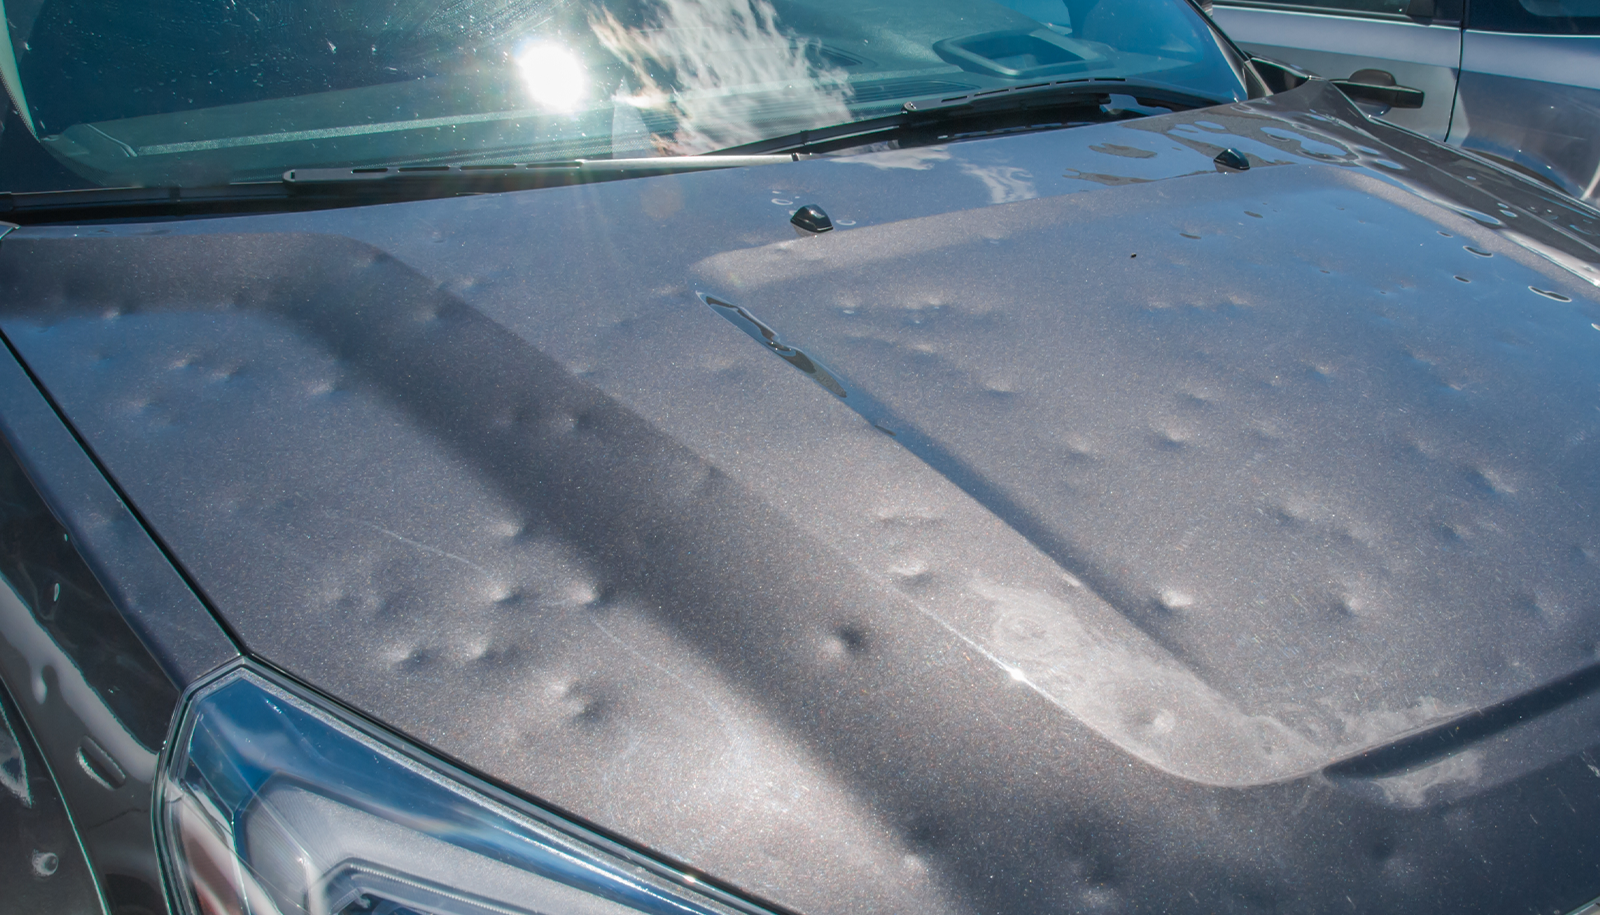 Does Auto Insurance Cover Hail Damage On Your Vehicle?